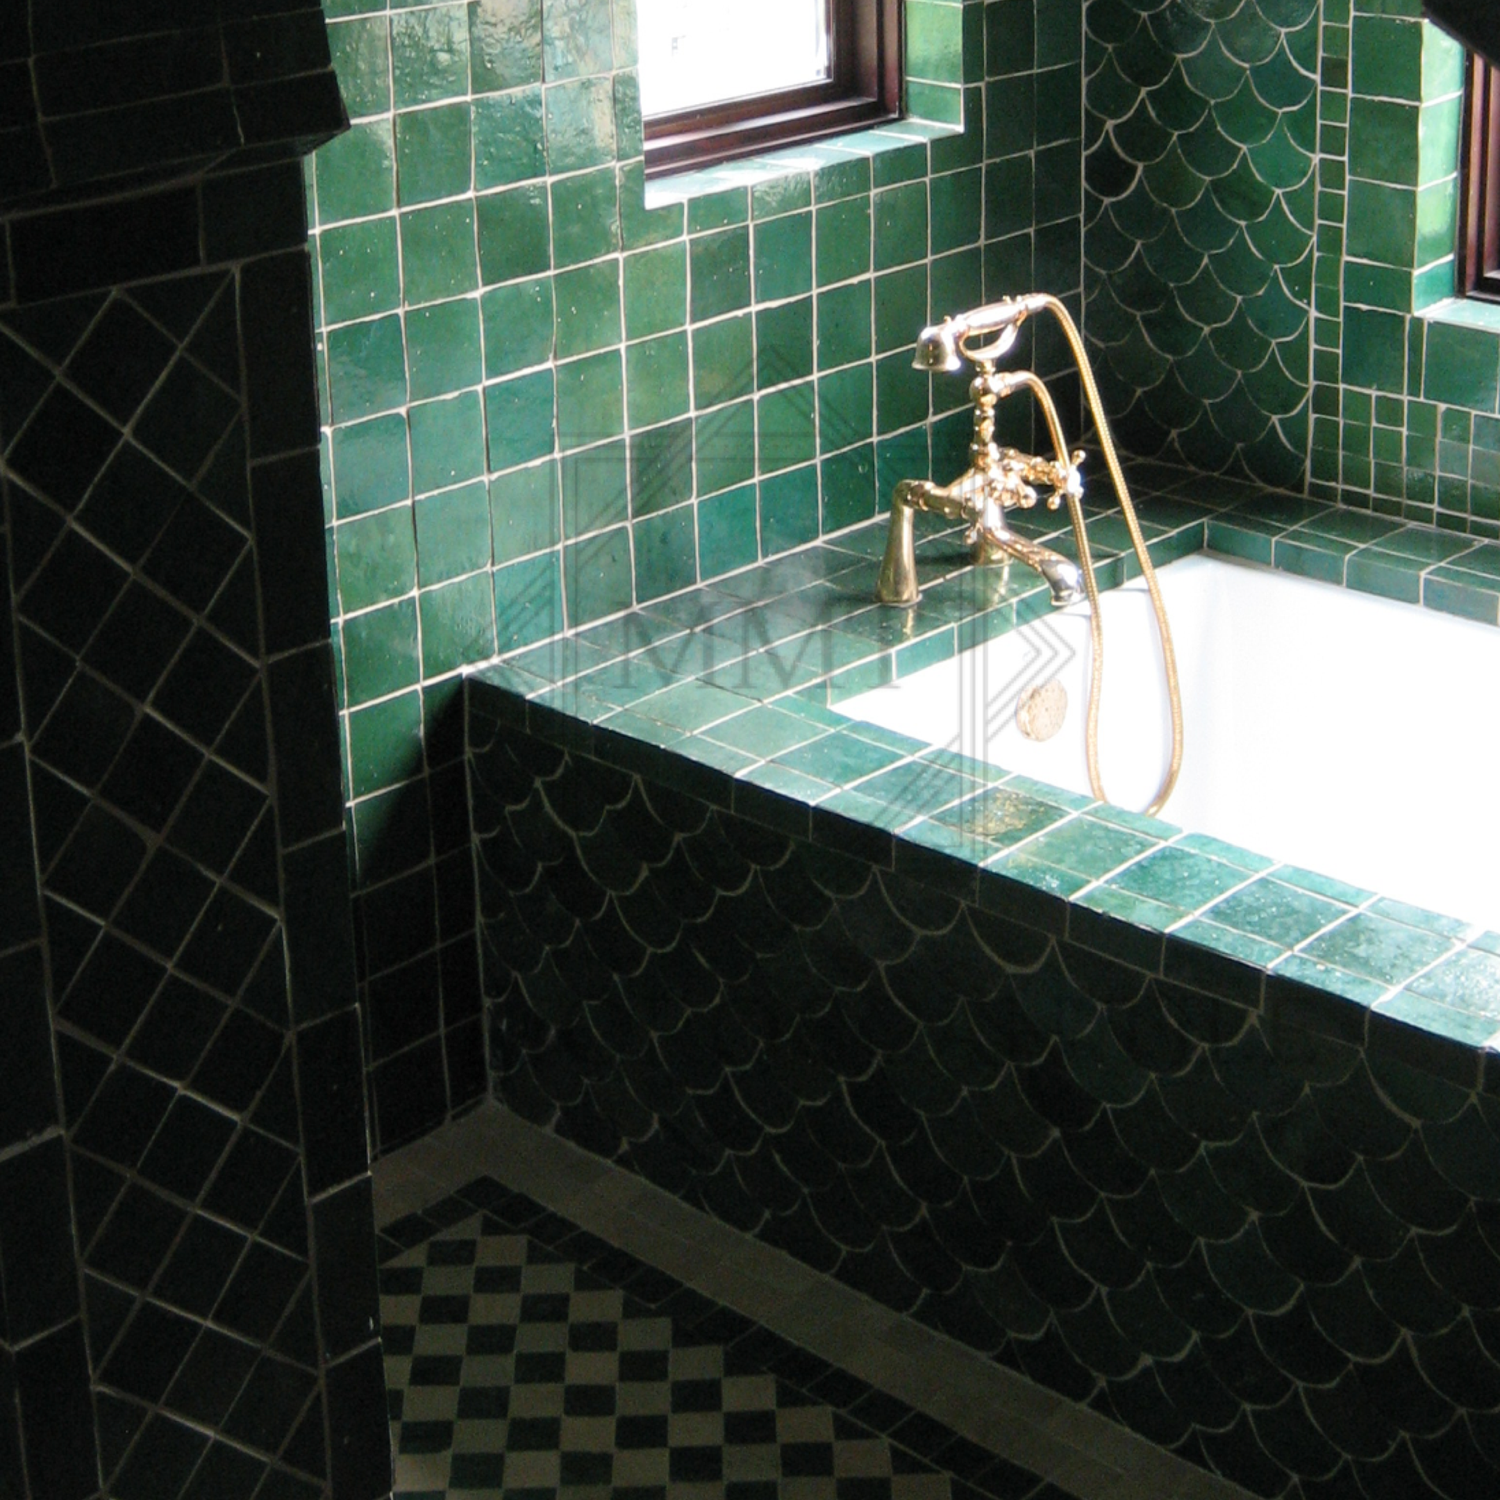 Fish Scale Mosaic Tile – My Moroccan Tile